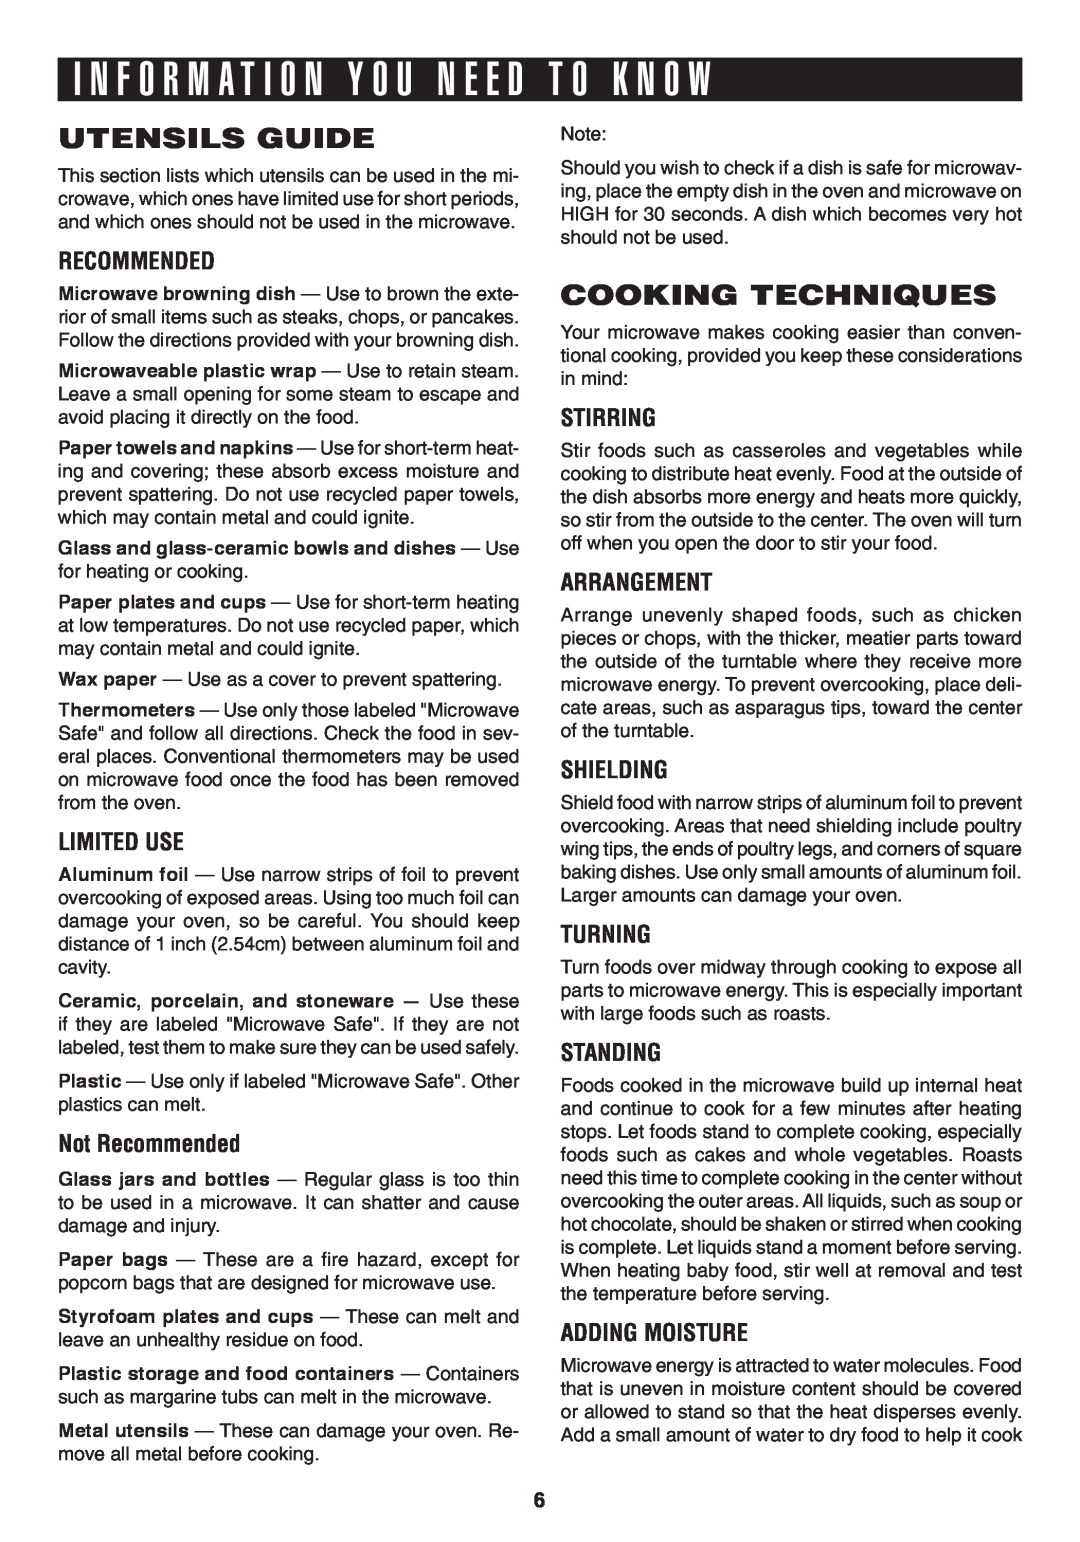 Sharp R-423T T O K N O w, Utensils Guide, Cooking Techniques, Limited Use, Not Recommended, Stirring, Arrangement 